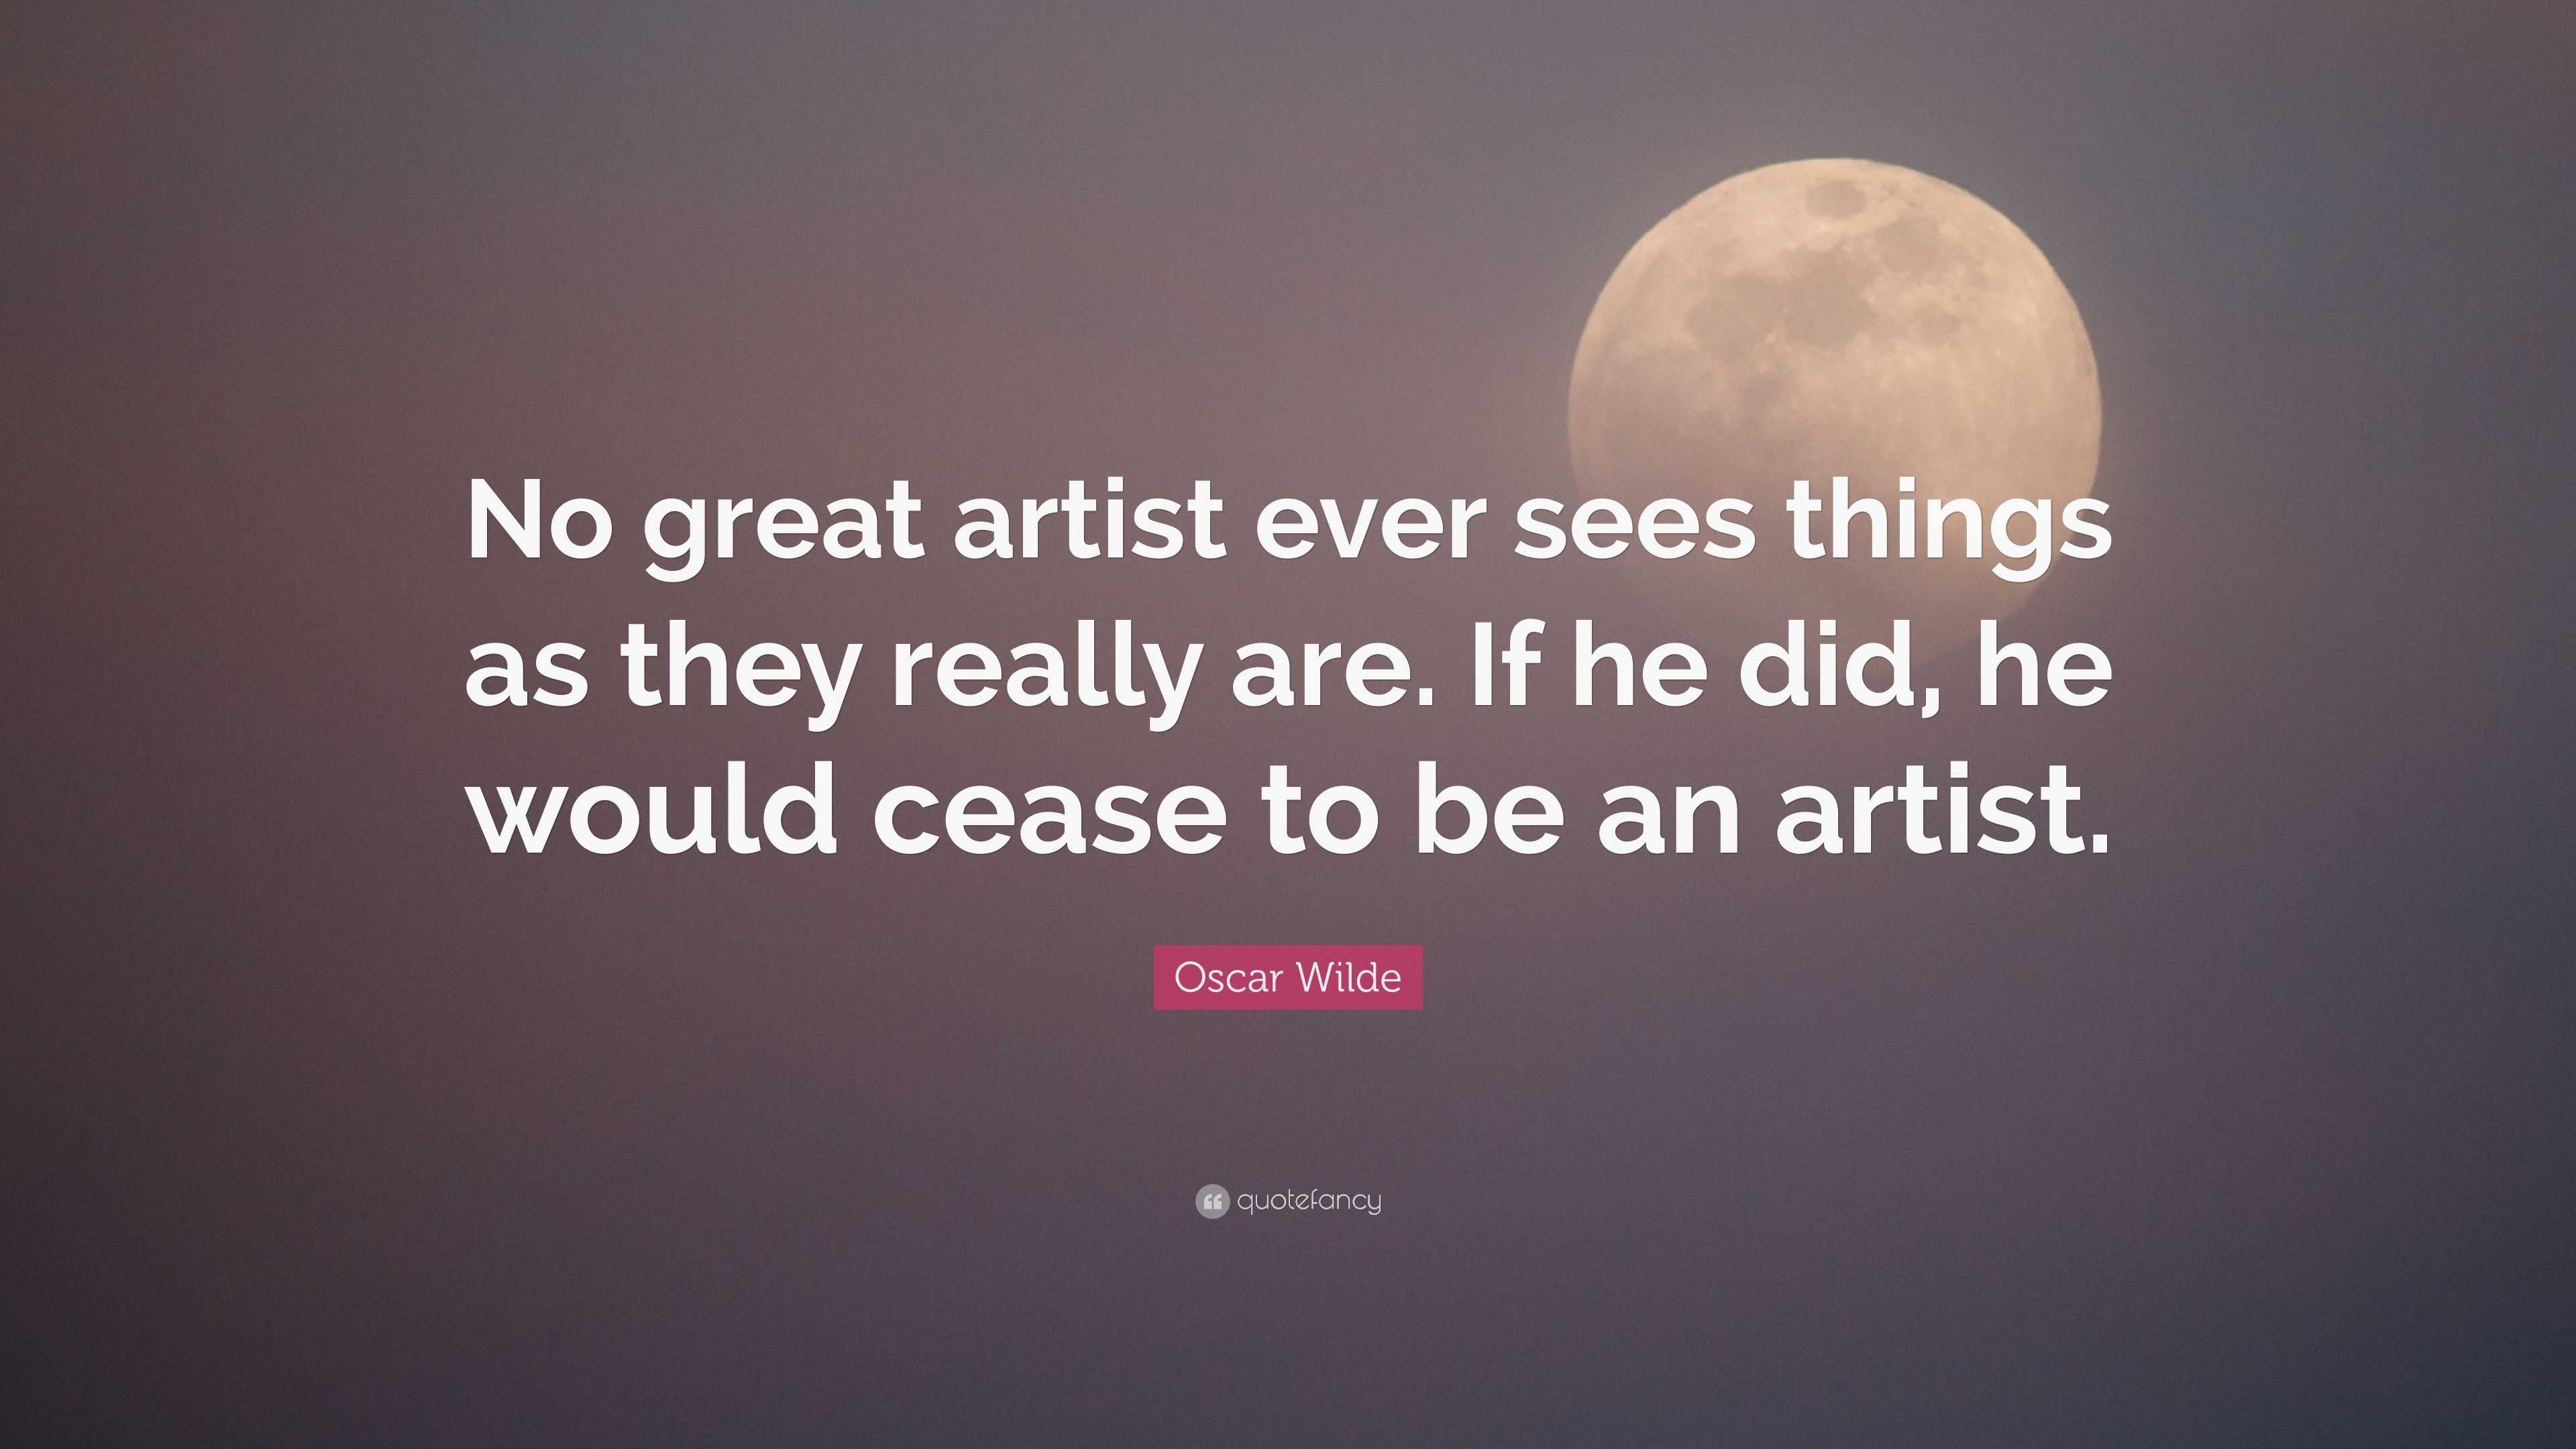 Oscar Wilde Quote: “No great artist ever sees things as they really are ...